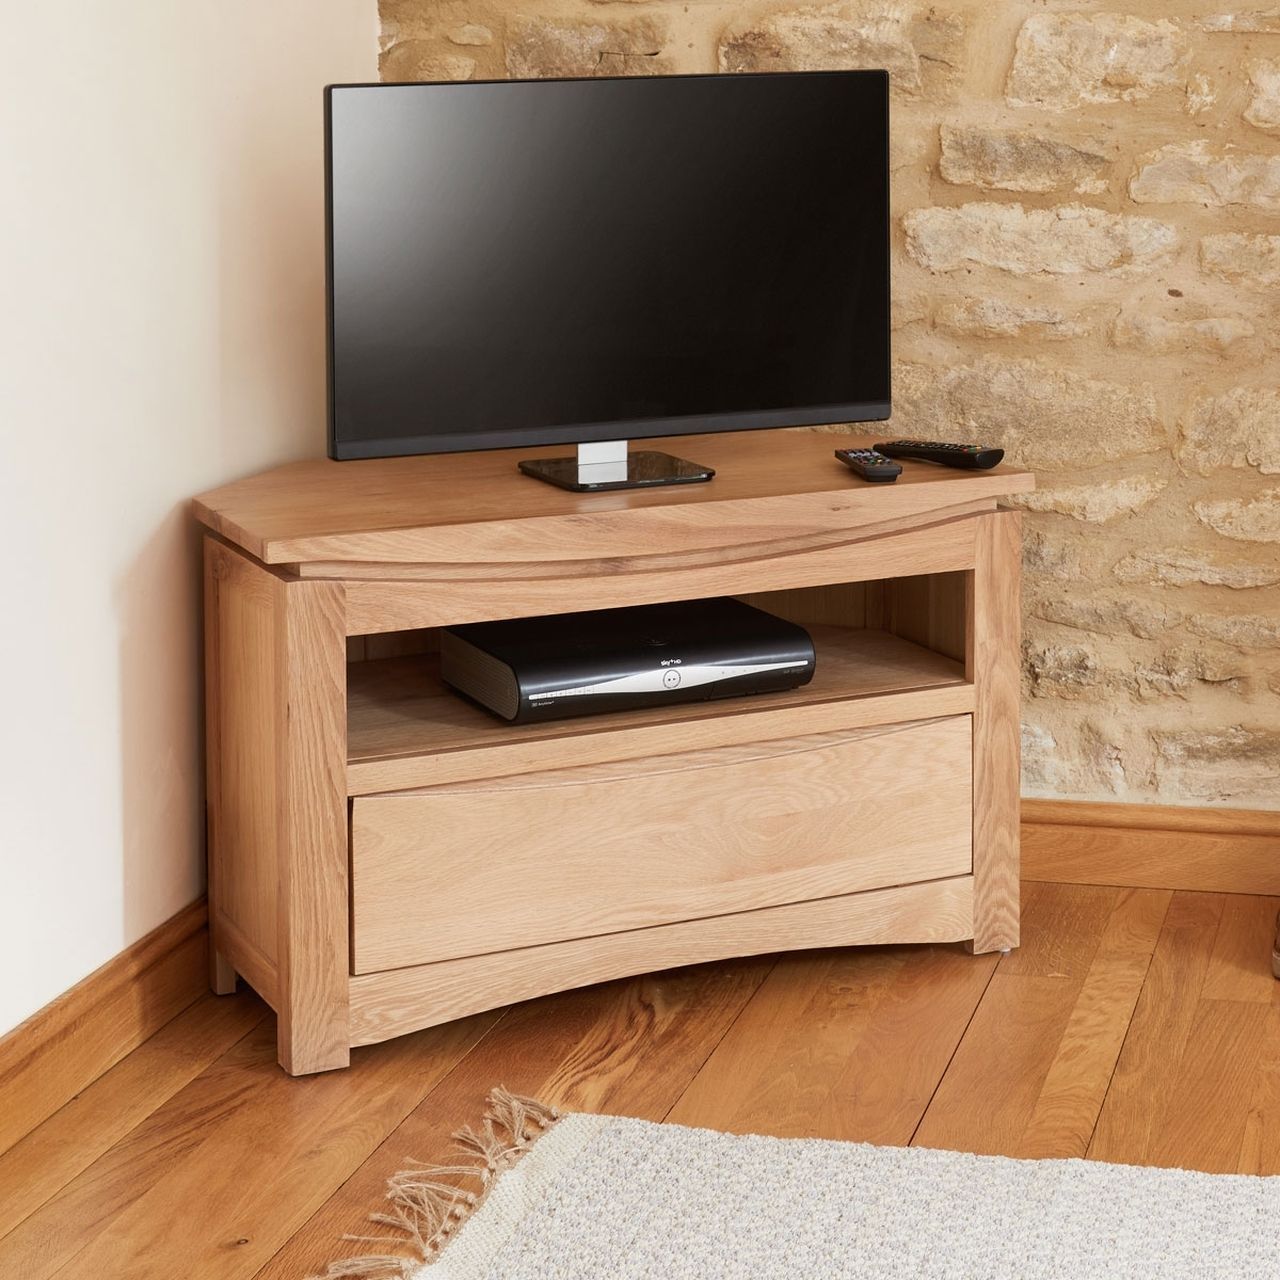 Roscoe Contemporary Oak Corner Television Cabinet – Wooden For Contemporary Corner Tv Stands (View 7 of 15)